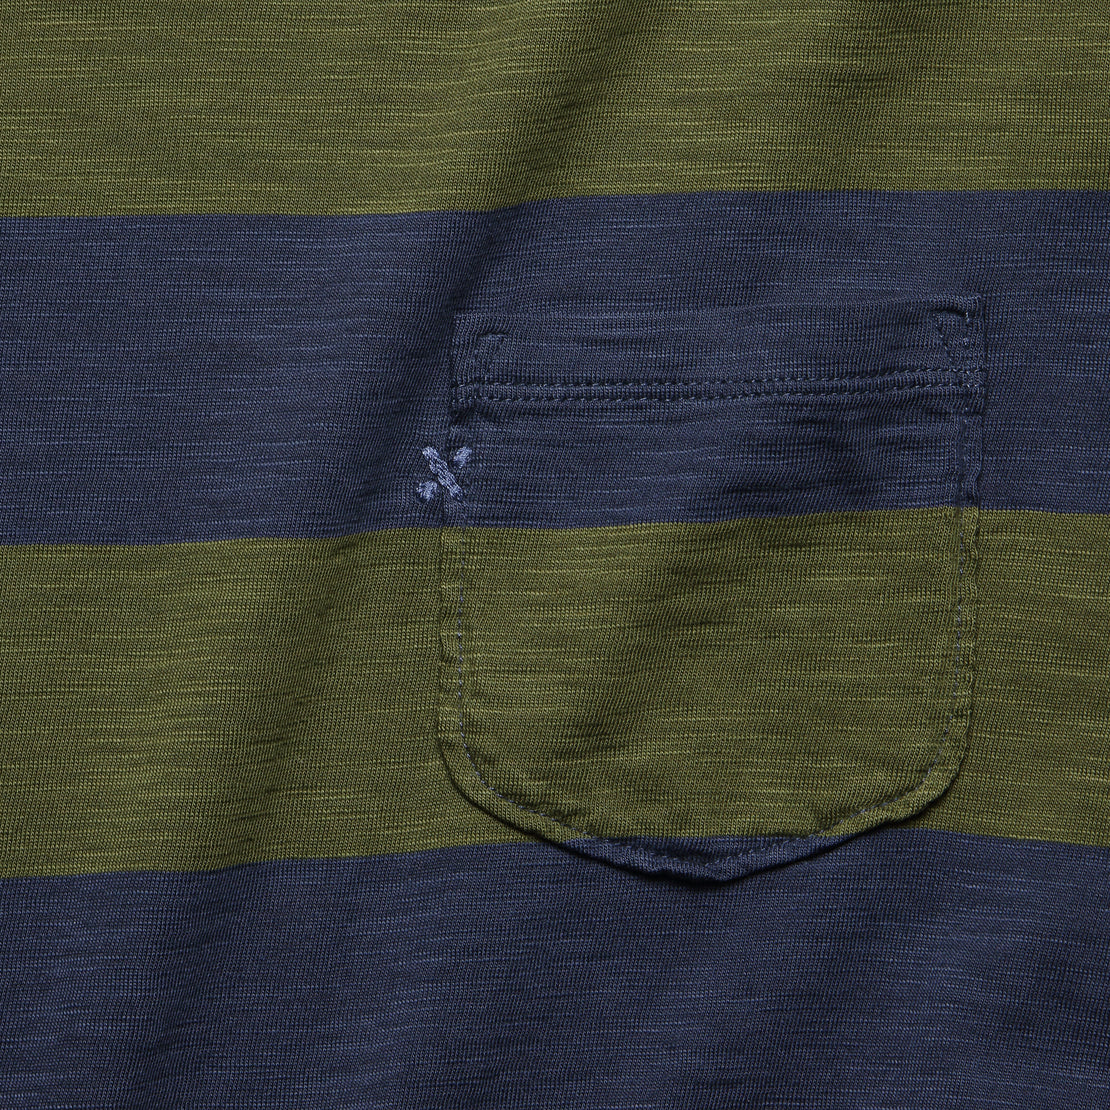 Wide Striped Pocket Tee - Navy/Military Green - Alex Mill - STAG Provisions - Tops - S/S Tee